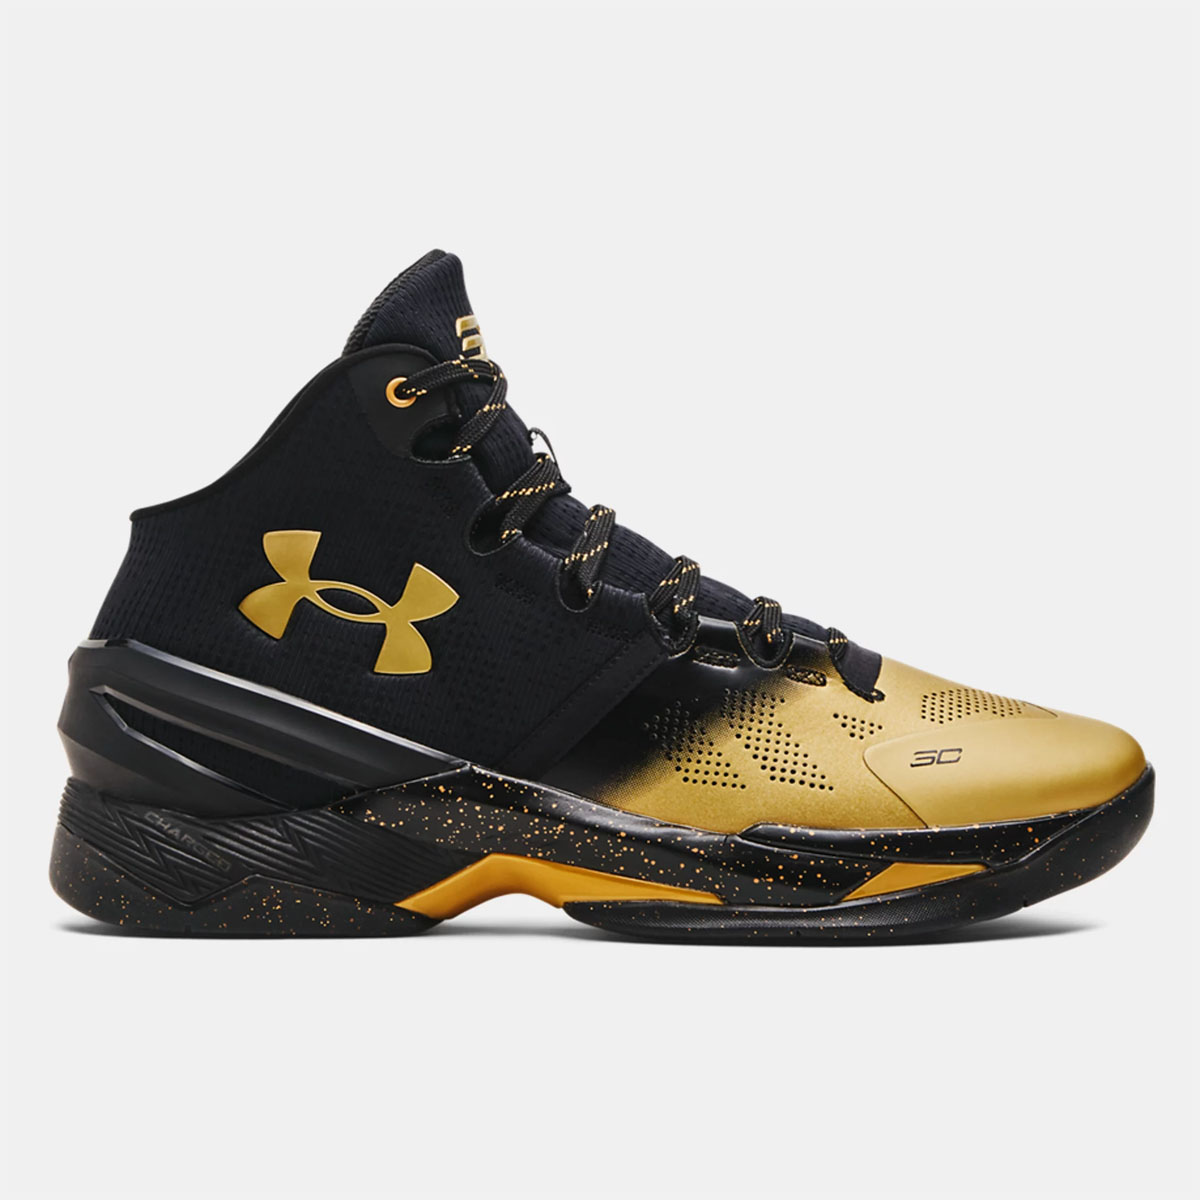 Curry 2 Unanimous